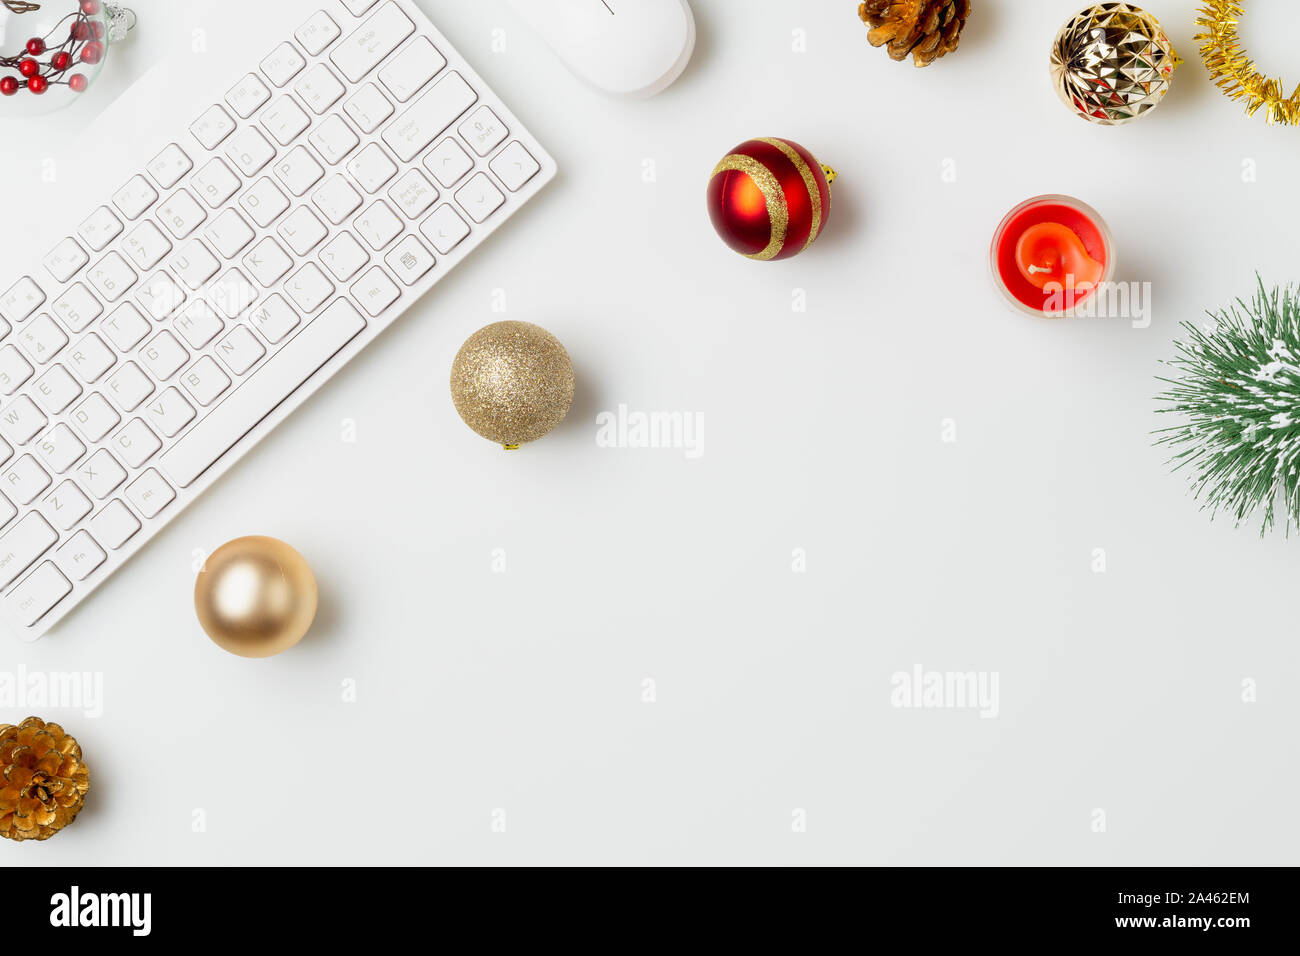 Flat lay top view office table desk, Christmas workspace with keyboard and christmas balls and other decorations on white background Stock Photo